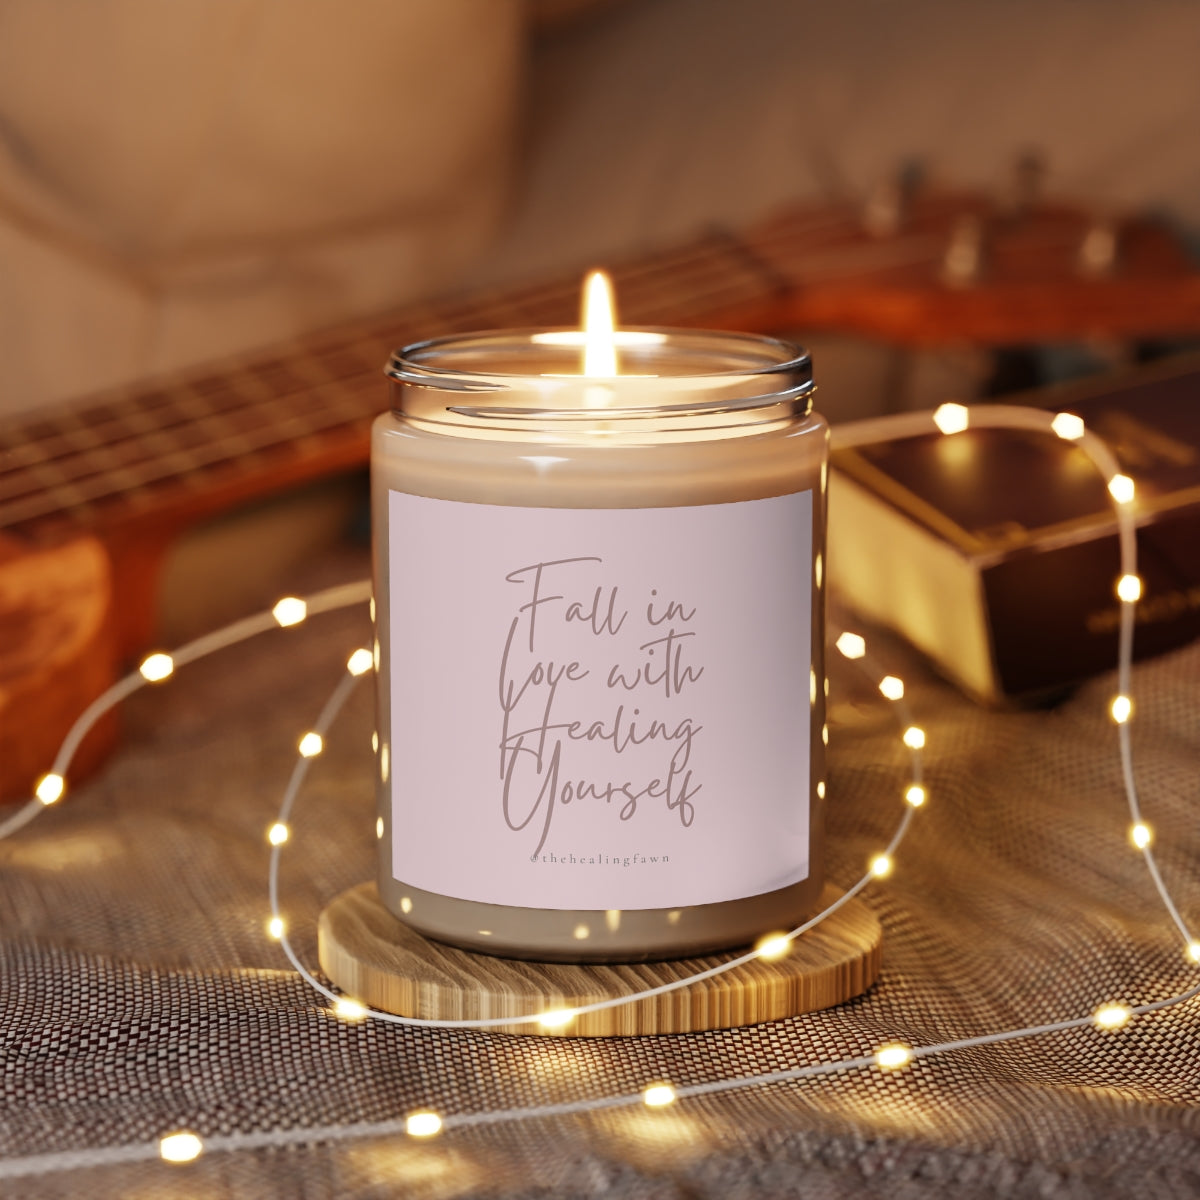 Fall in Love Healing Candle, 9oz